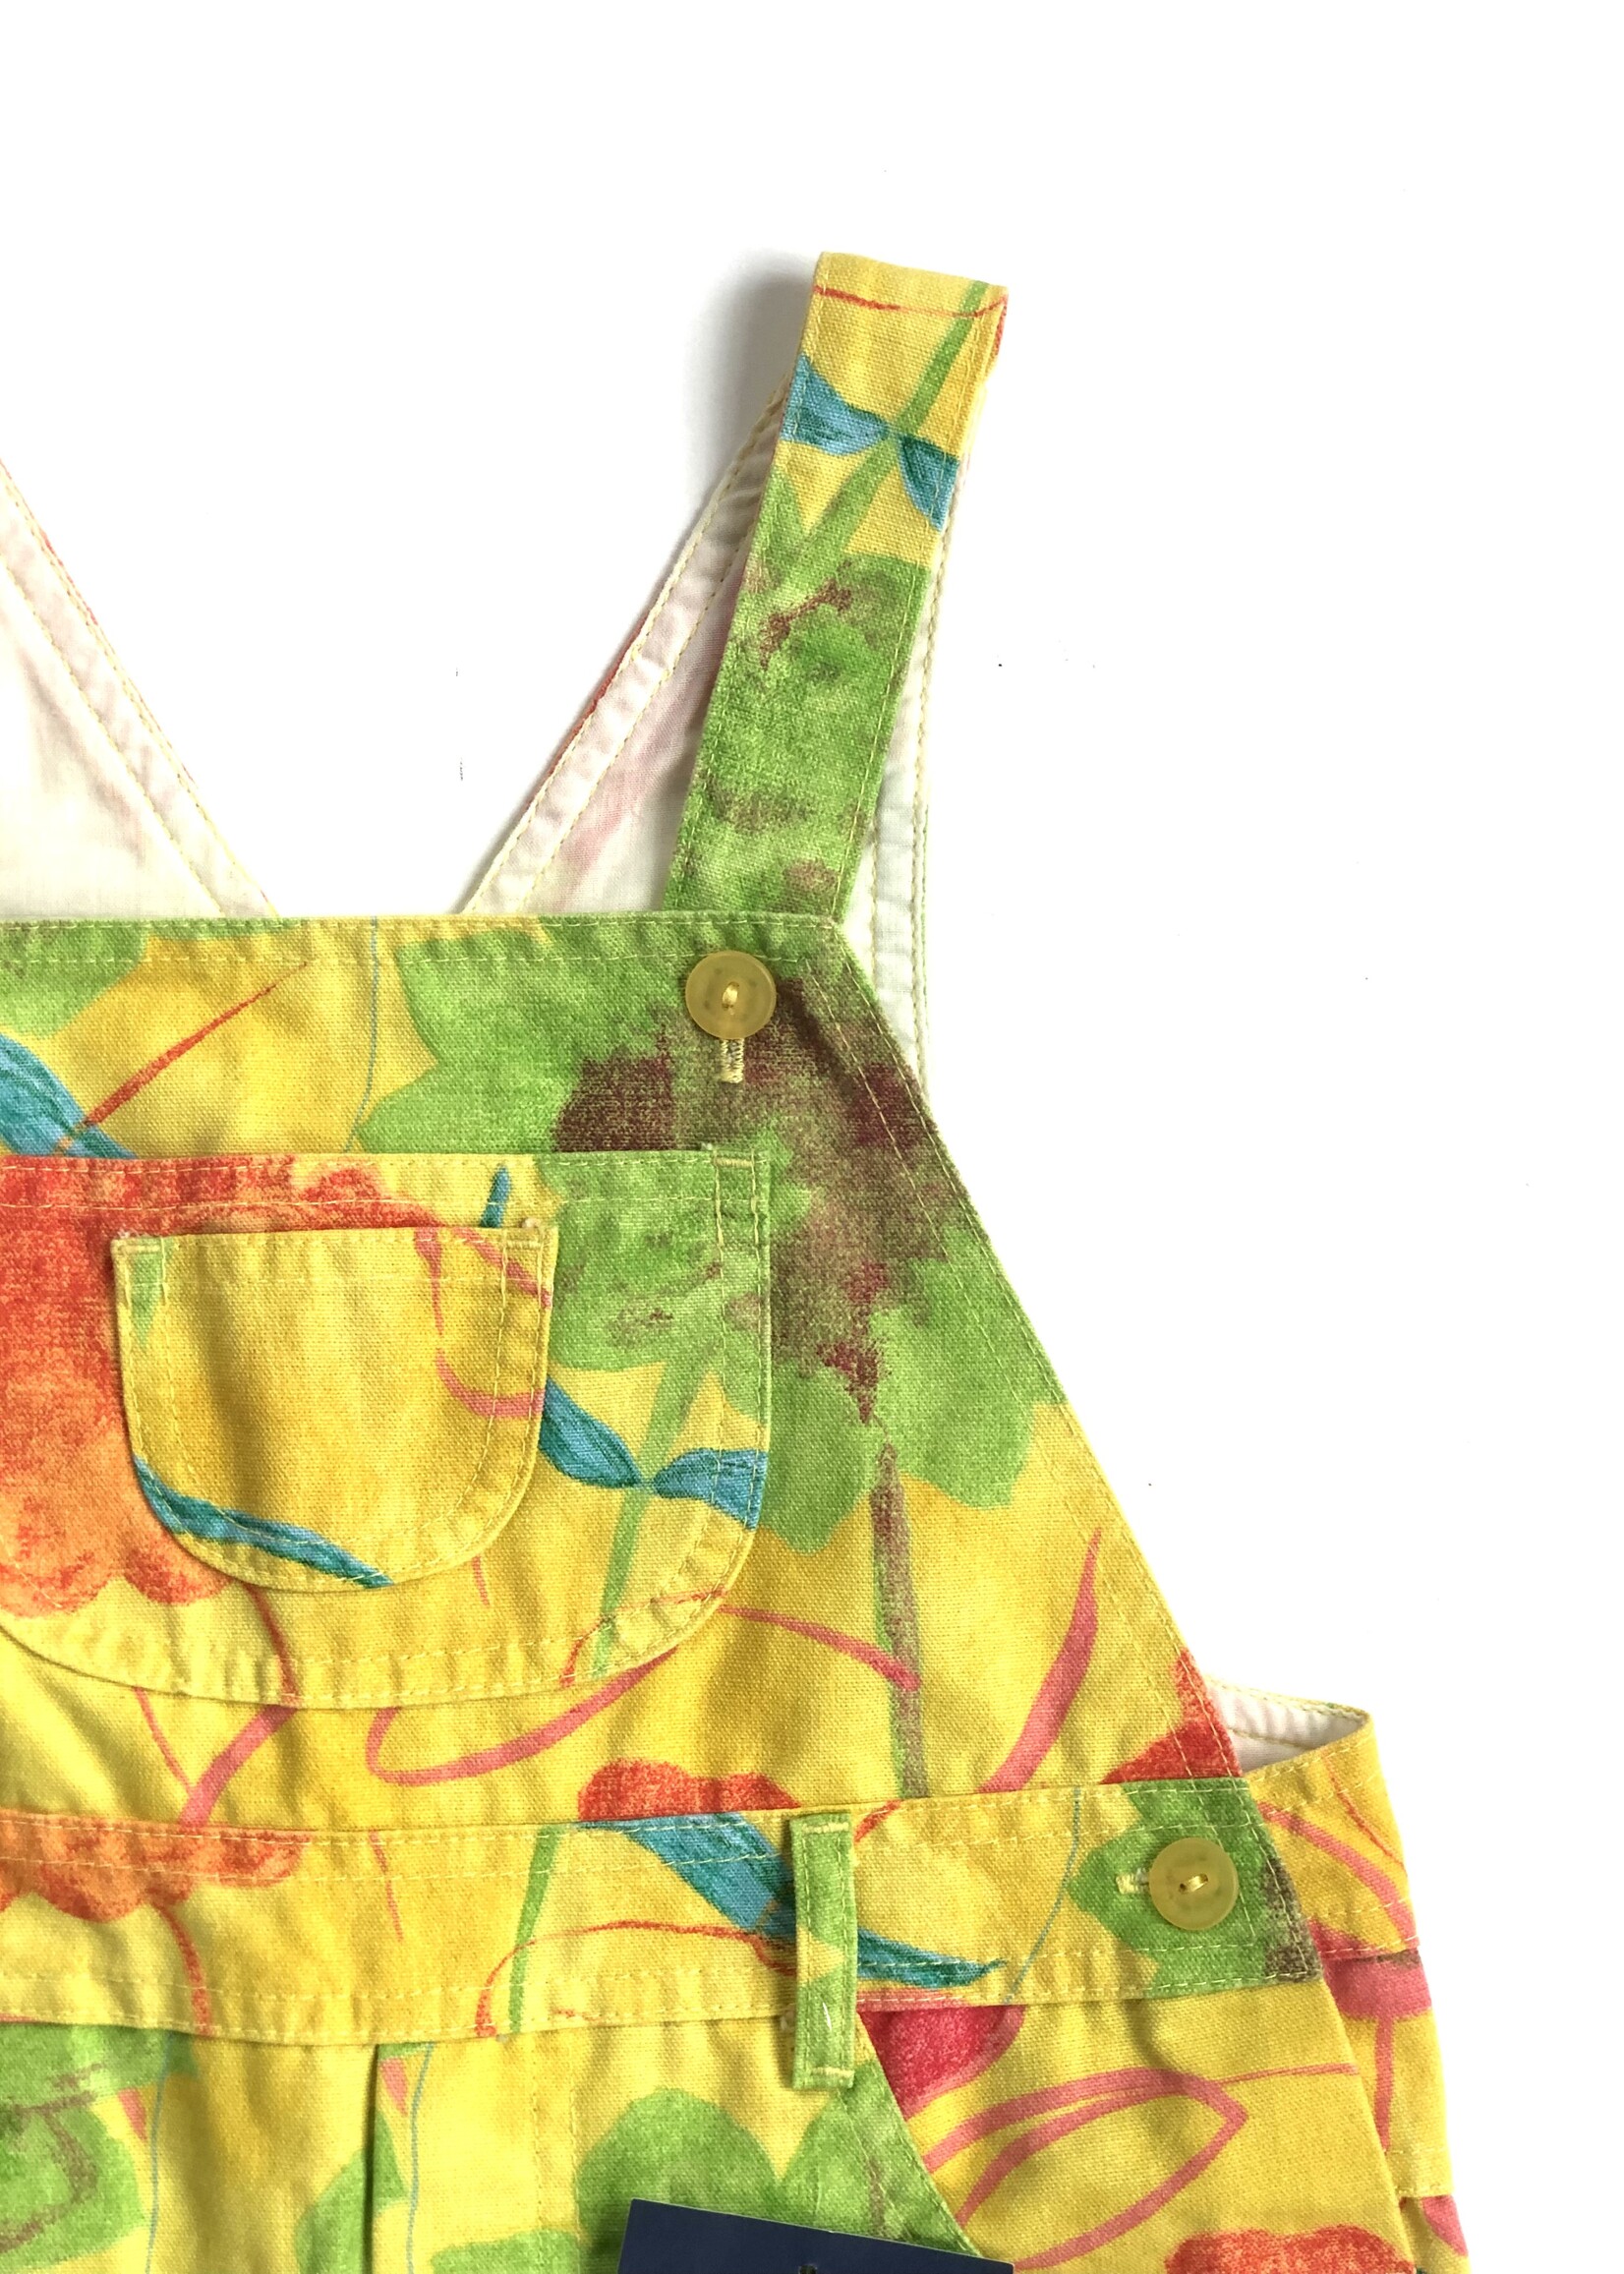 Yellow floral shortall 4-6y